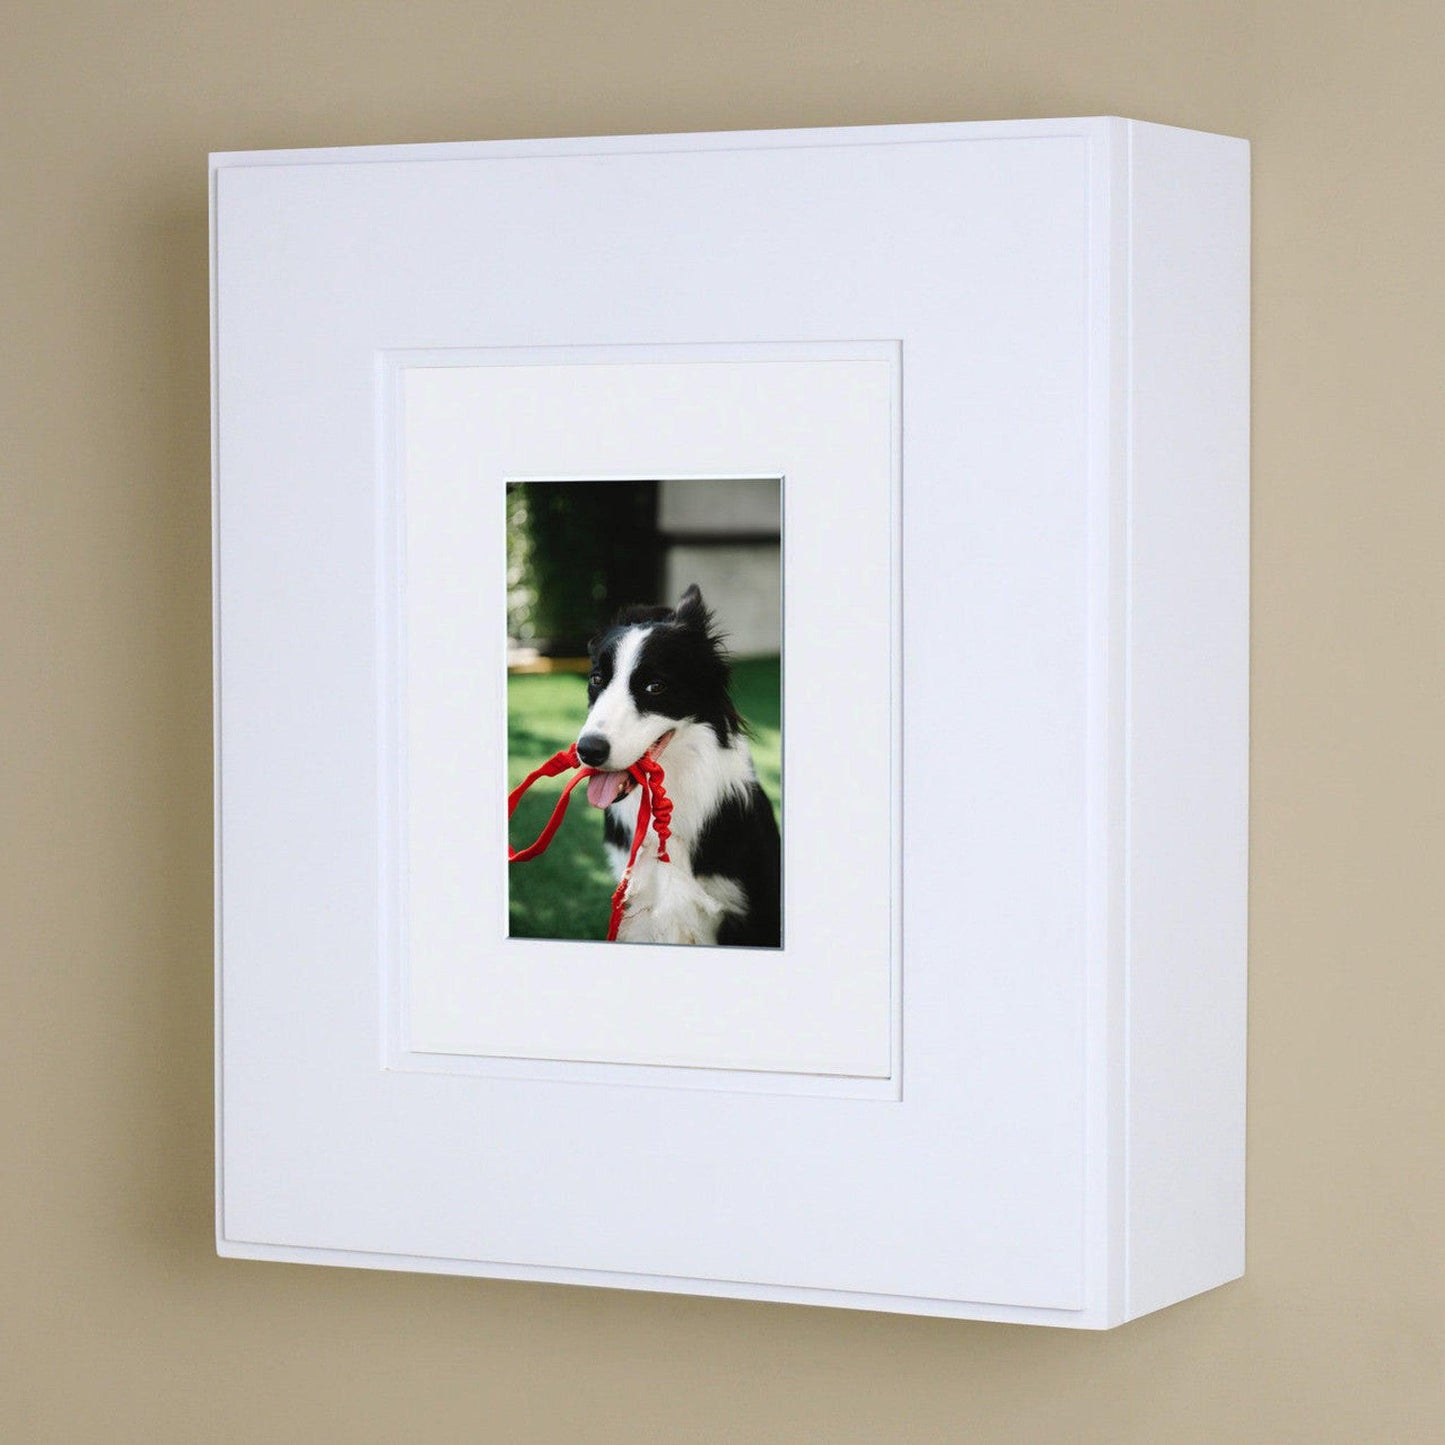 Fox Hollow Furnishings 15" H x 13" W White Shaker Wall Mount Picture Frame Medicine Cabinet With Ivory 5" x 7" Matting